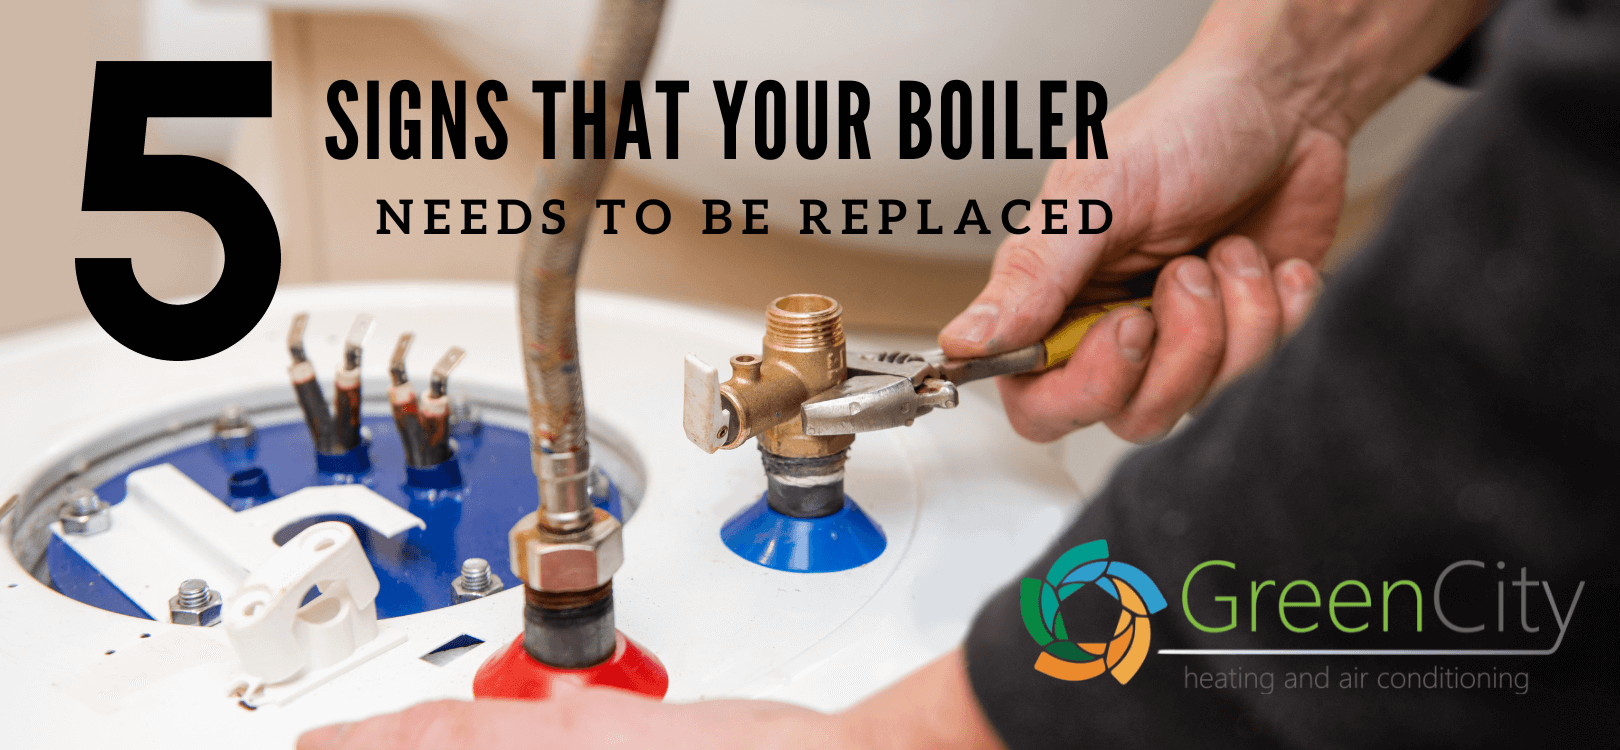 5 Signs That Your Boiler Needs to be Replaced